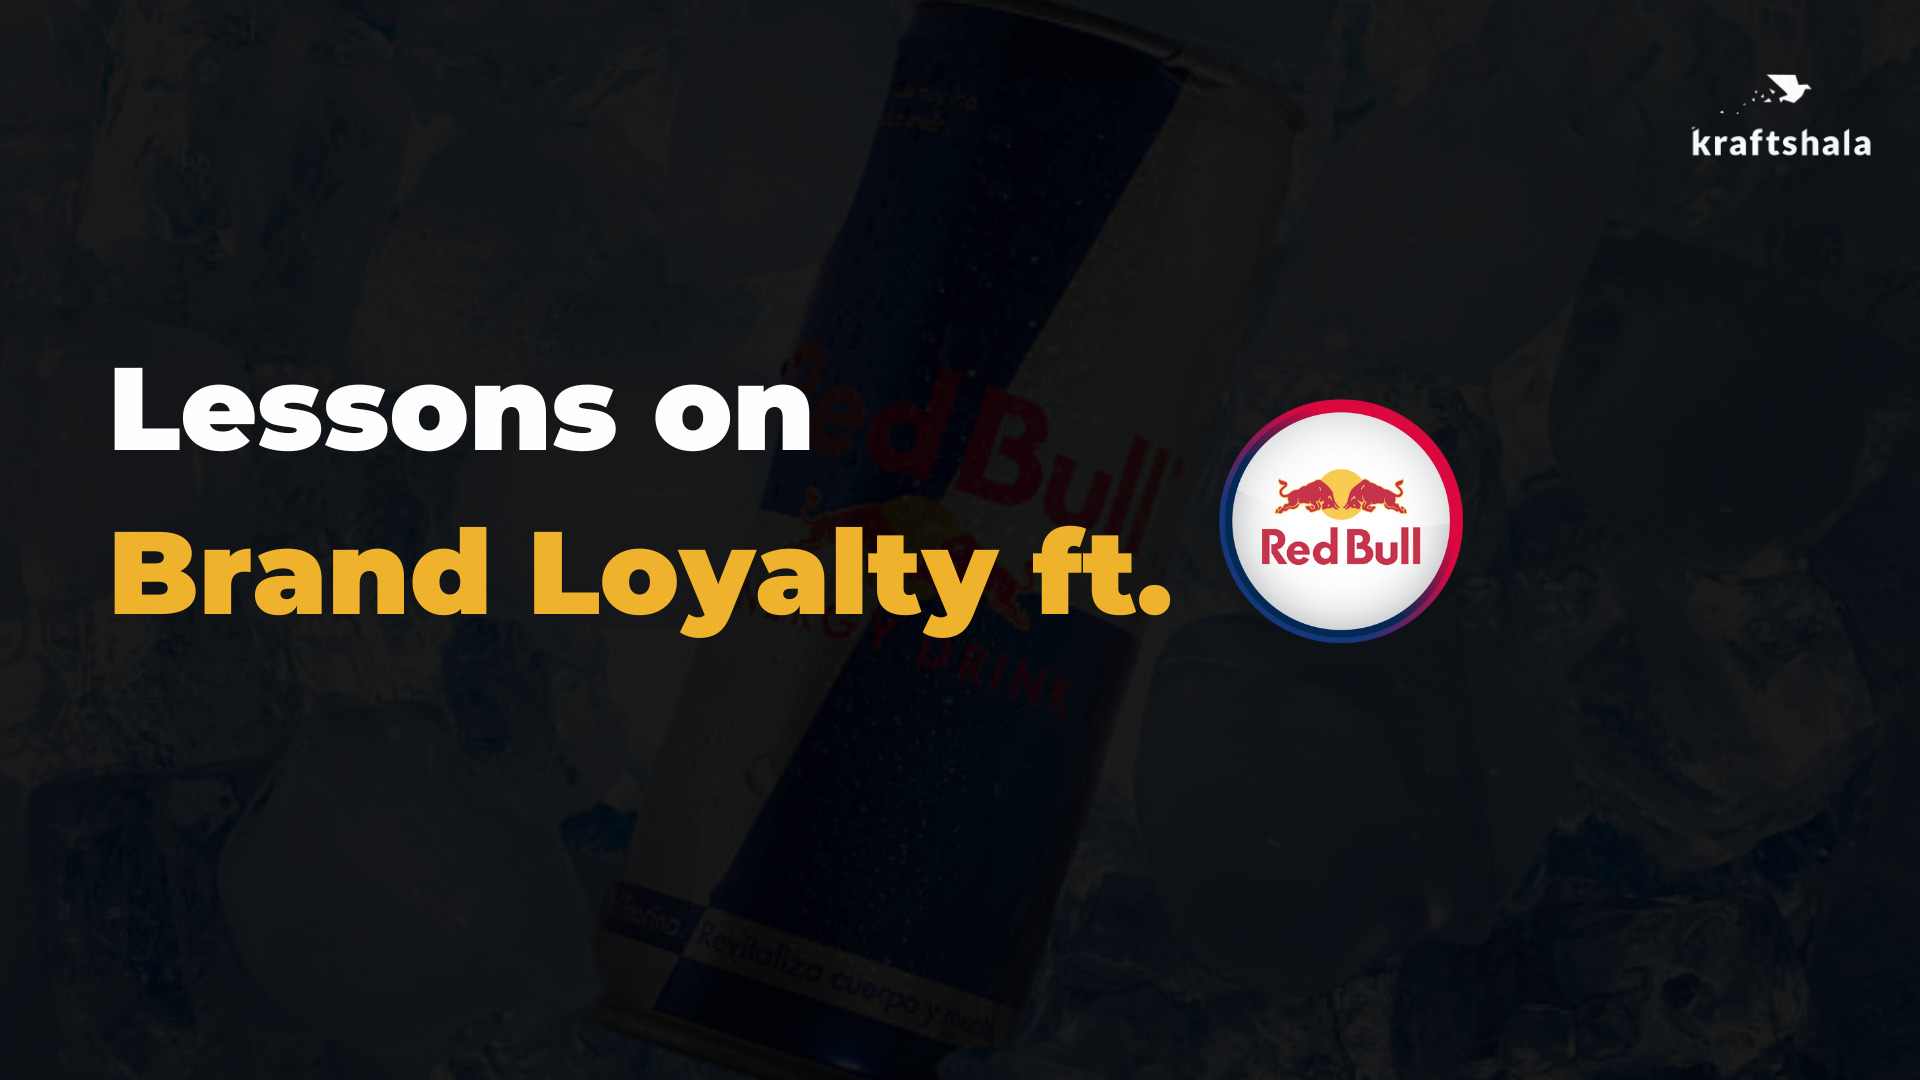 4 Marketing Lessons from Red Bull on Brand Loyalty